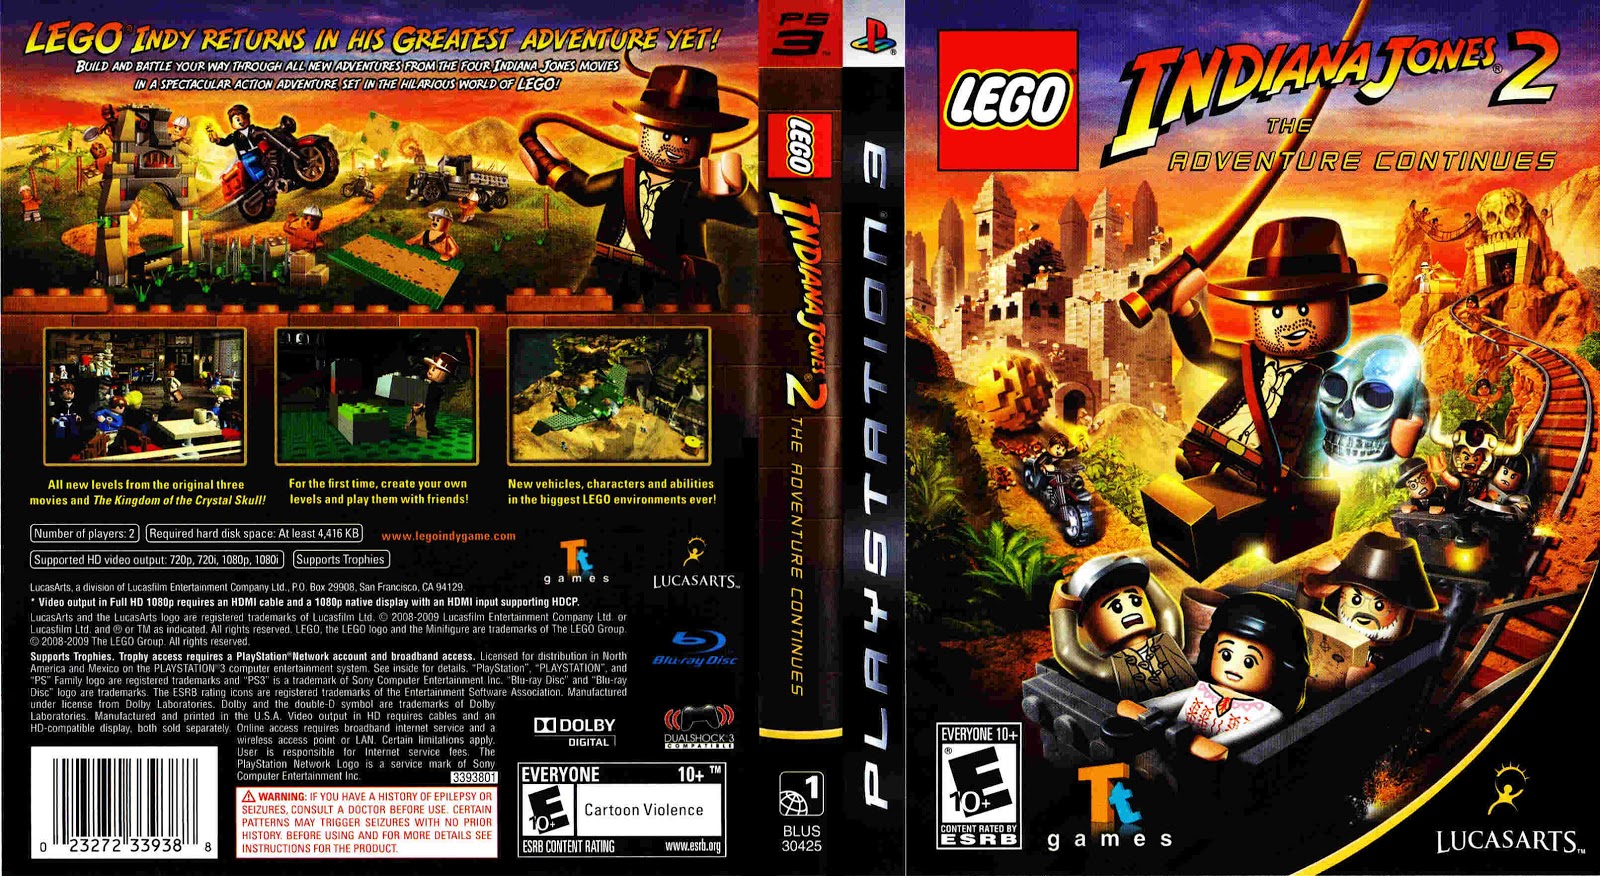 World Of Covers 01: LEGO Indiana Jones 2 The Adventure Continues (2009